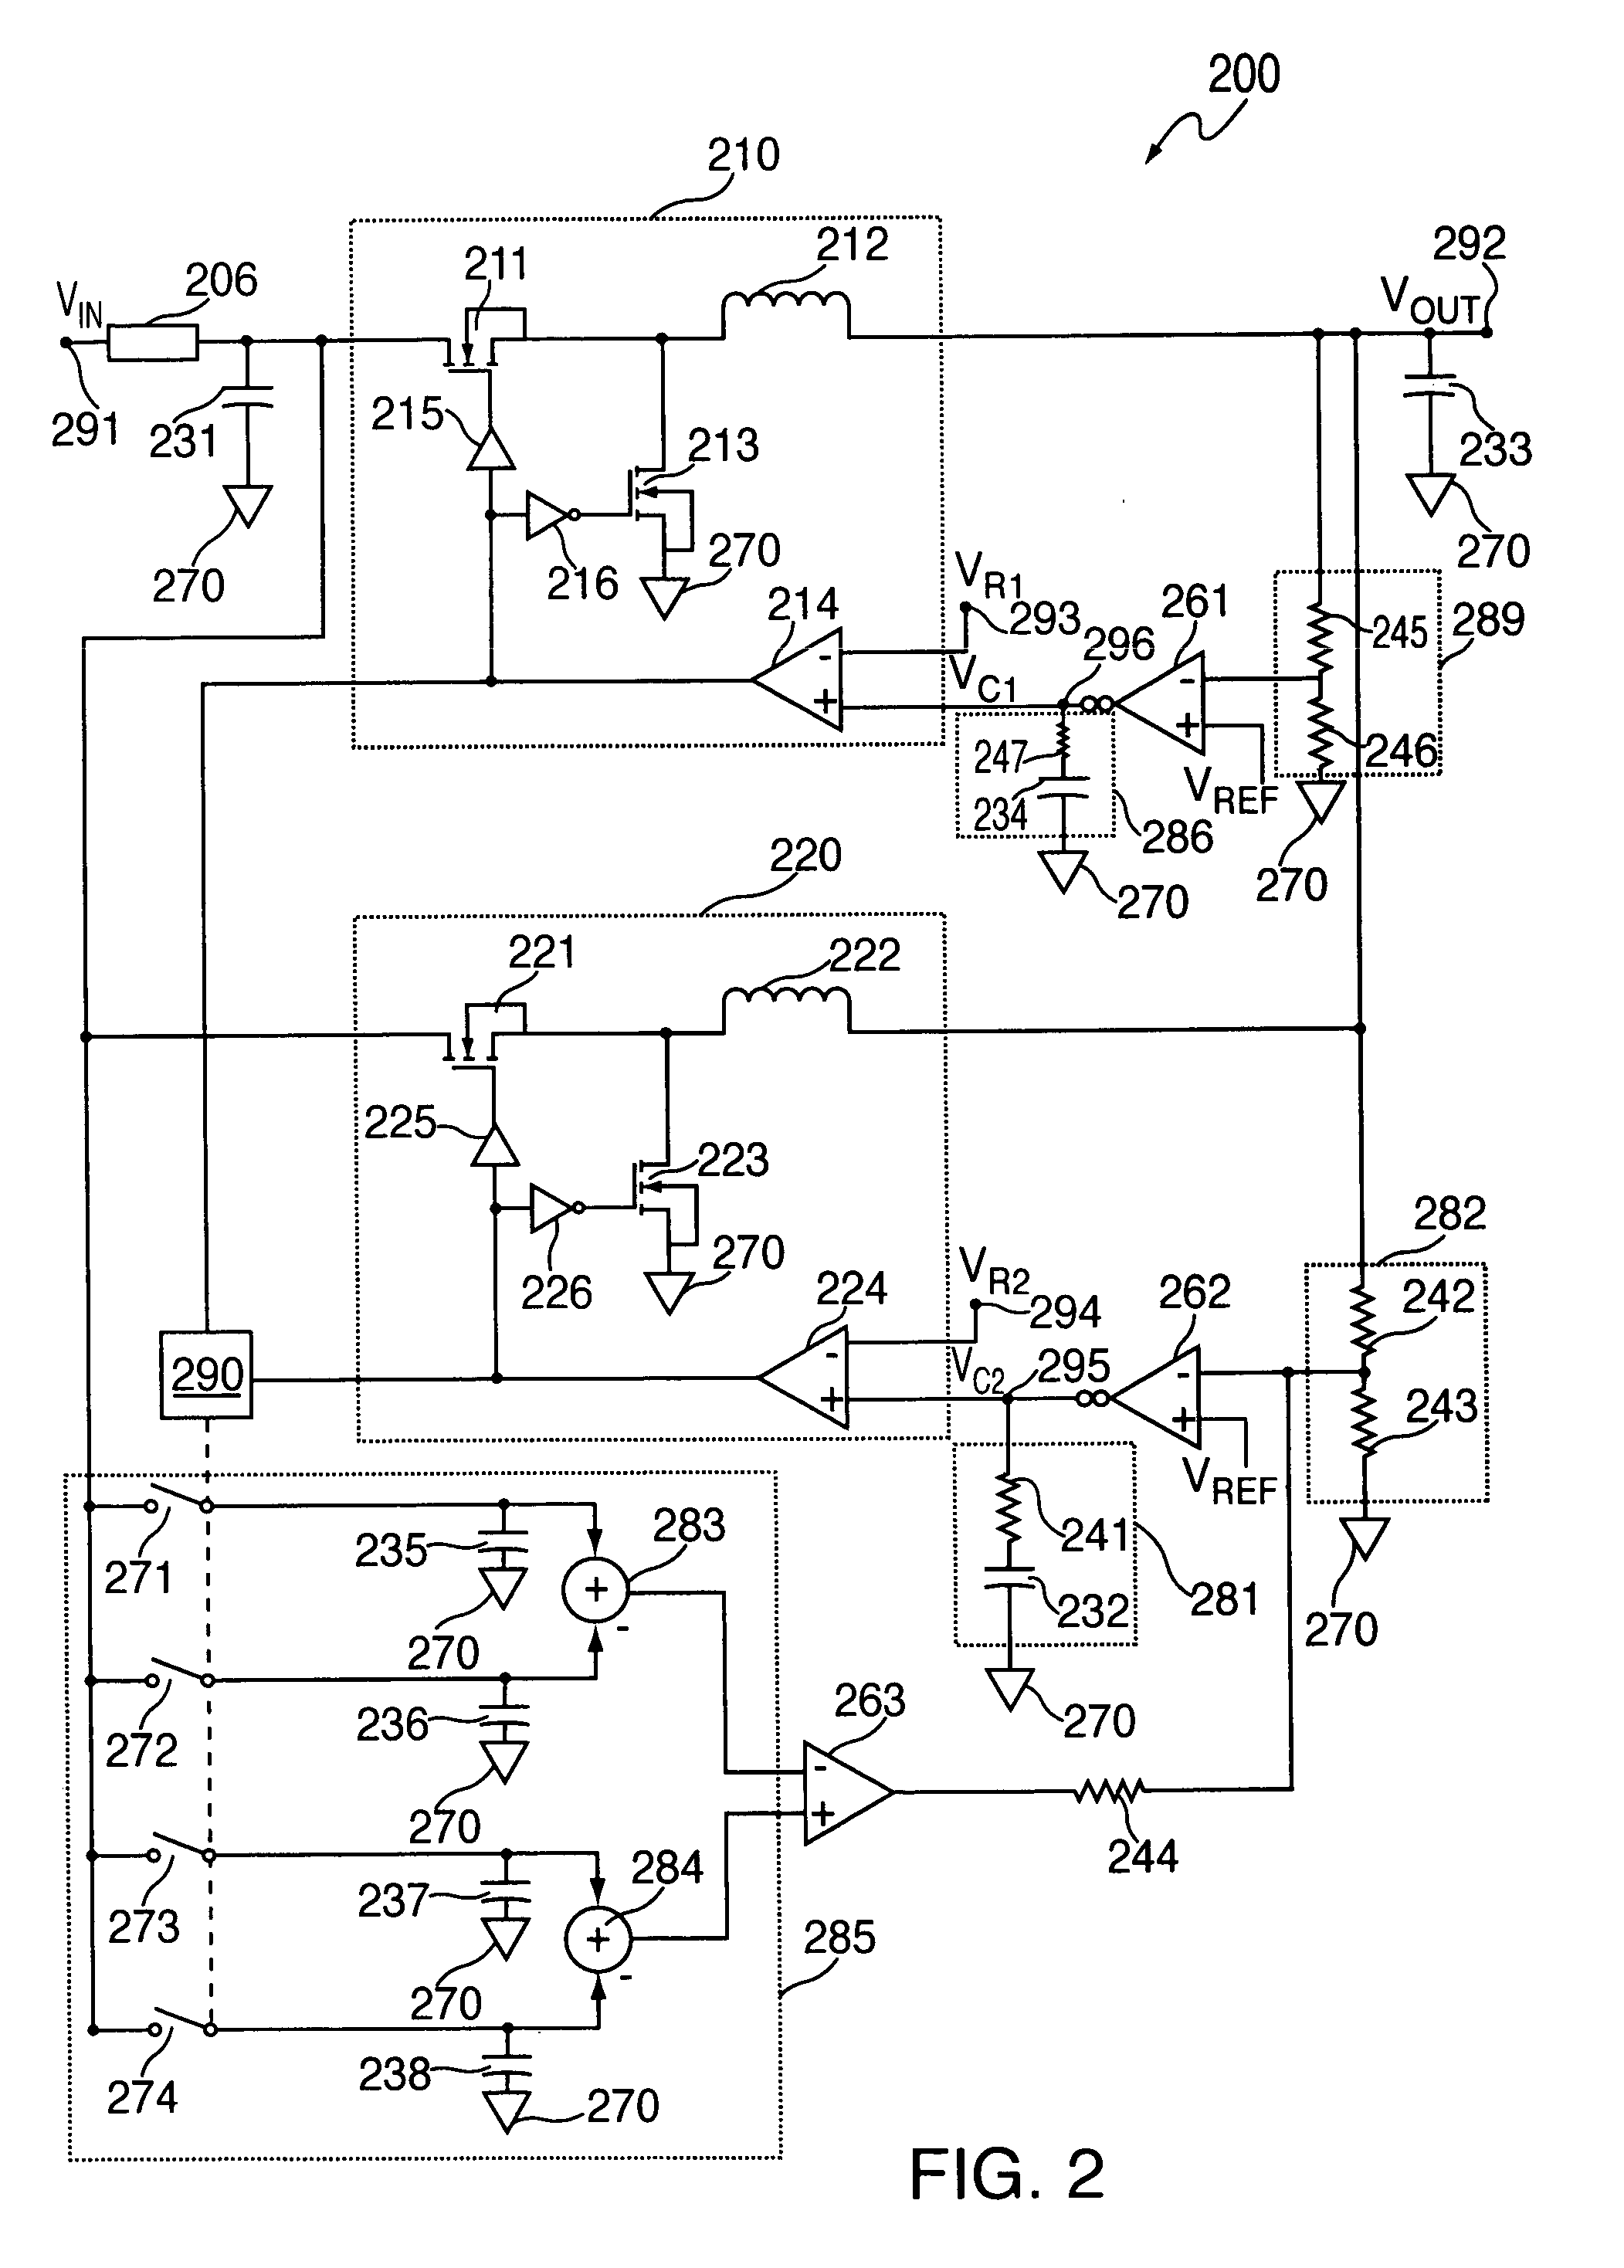 Circuits and methods for providing multiple phase switching regulators which employ the input capacitor voltage signal for current sensing